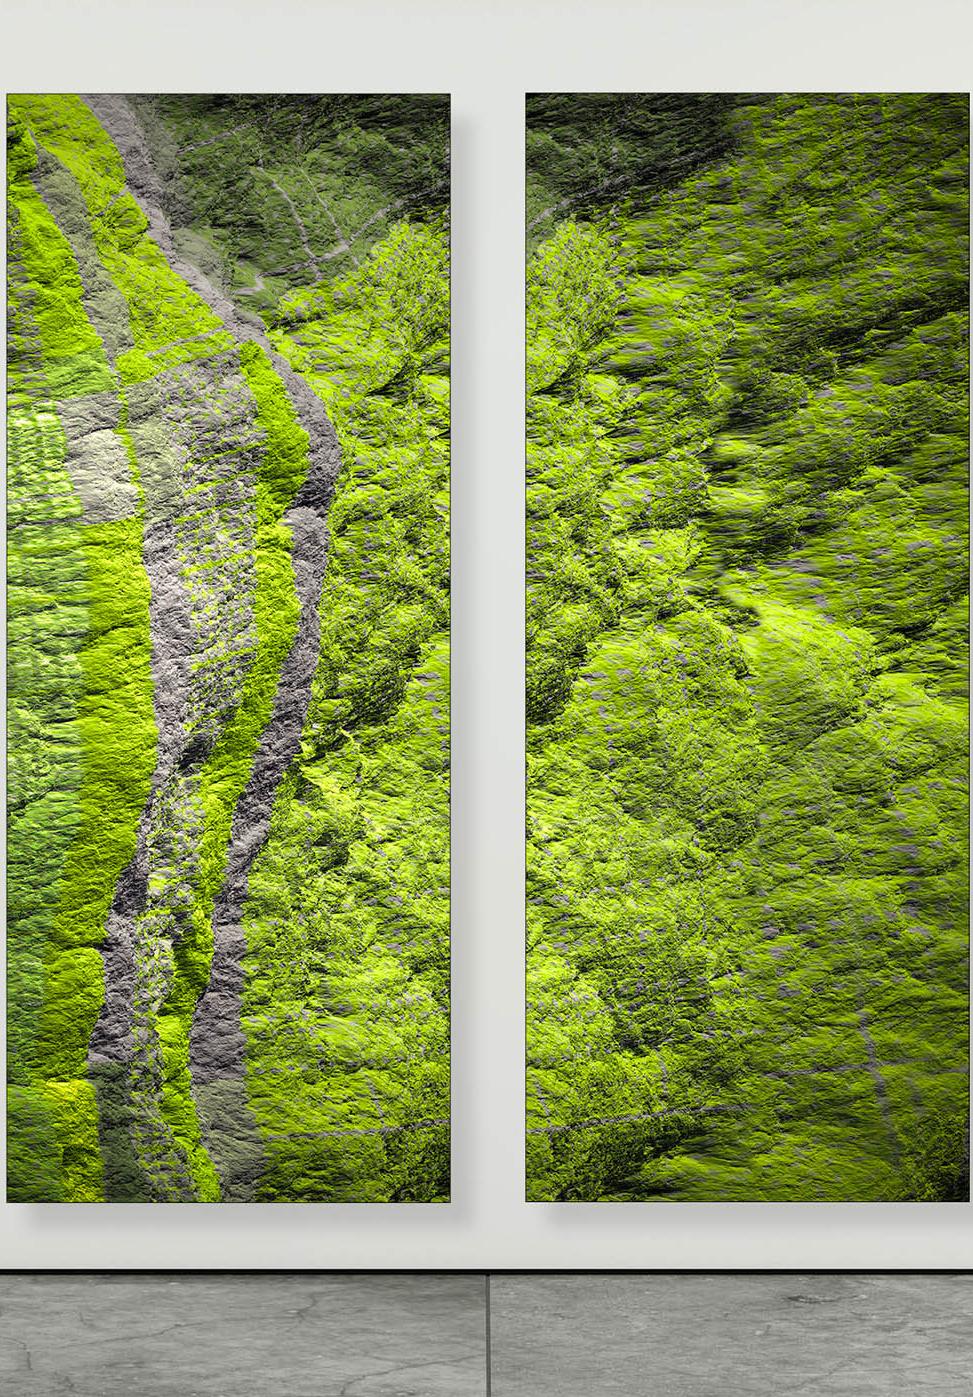 Diptych - Digital Clift - Green Forest Aerial View - Contemporary Photograph by Paul-Émile Rioux